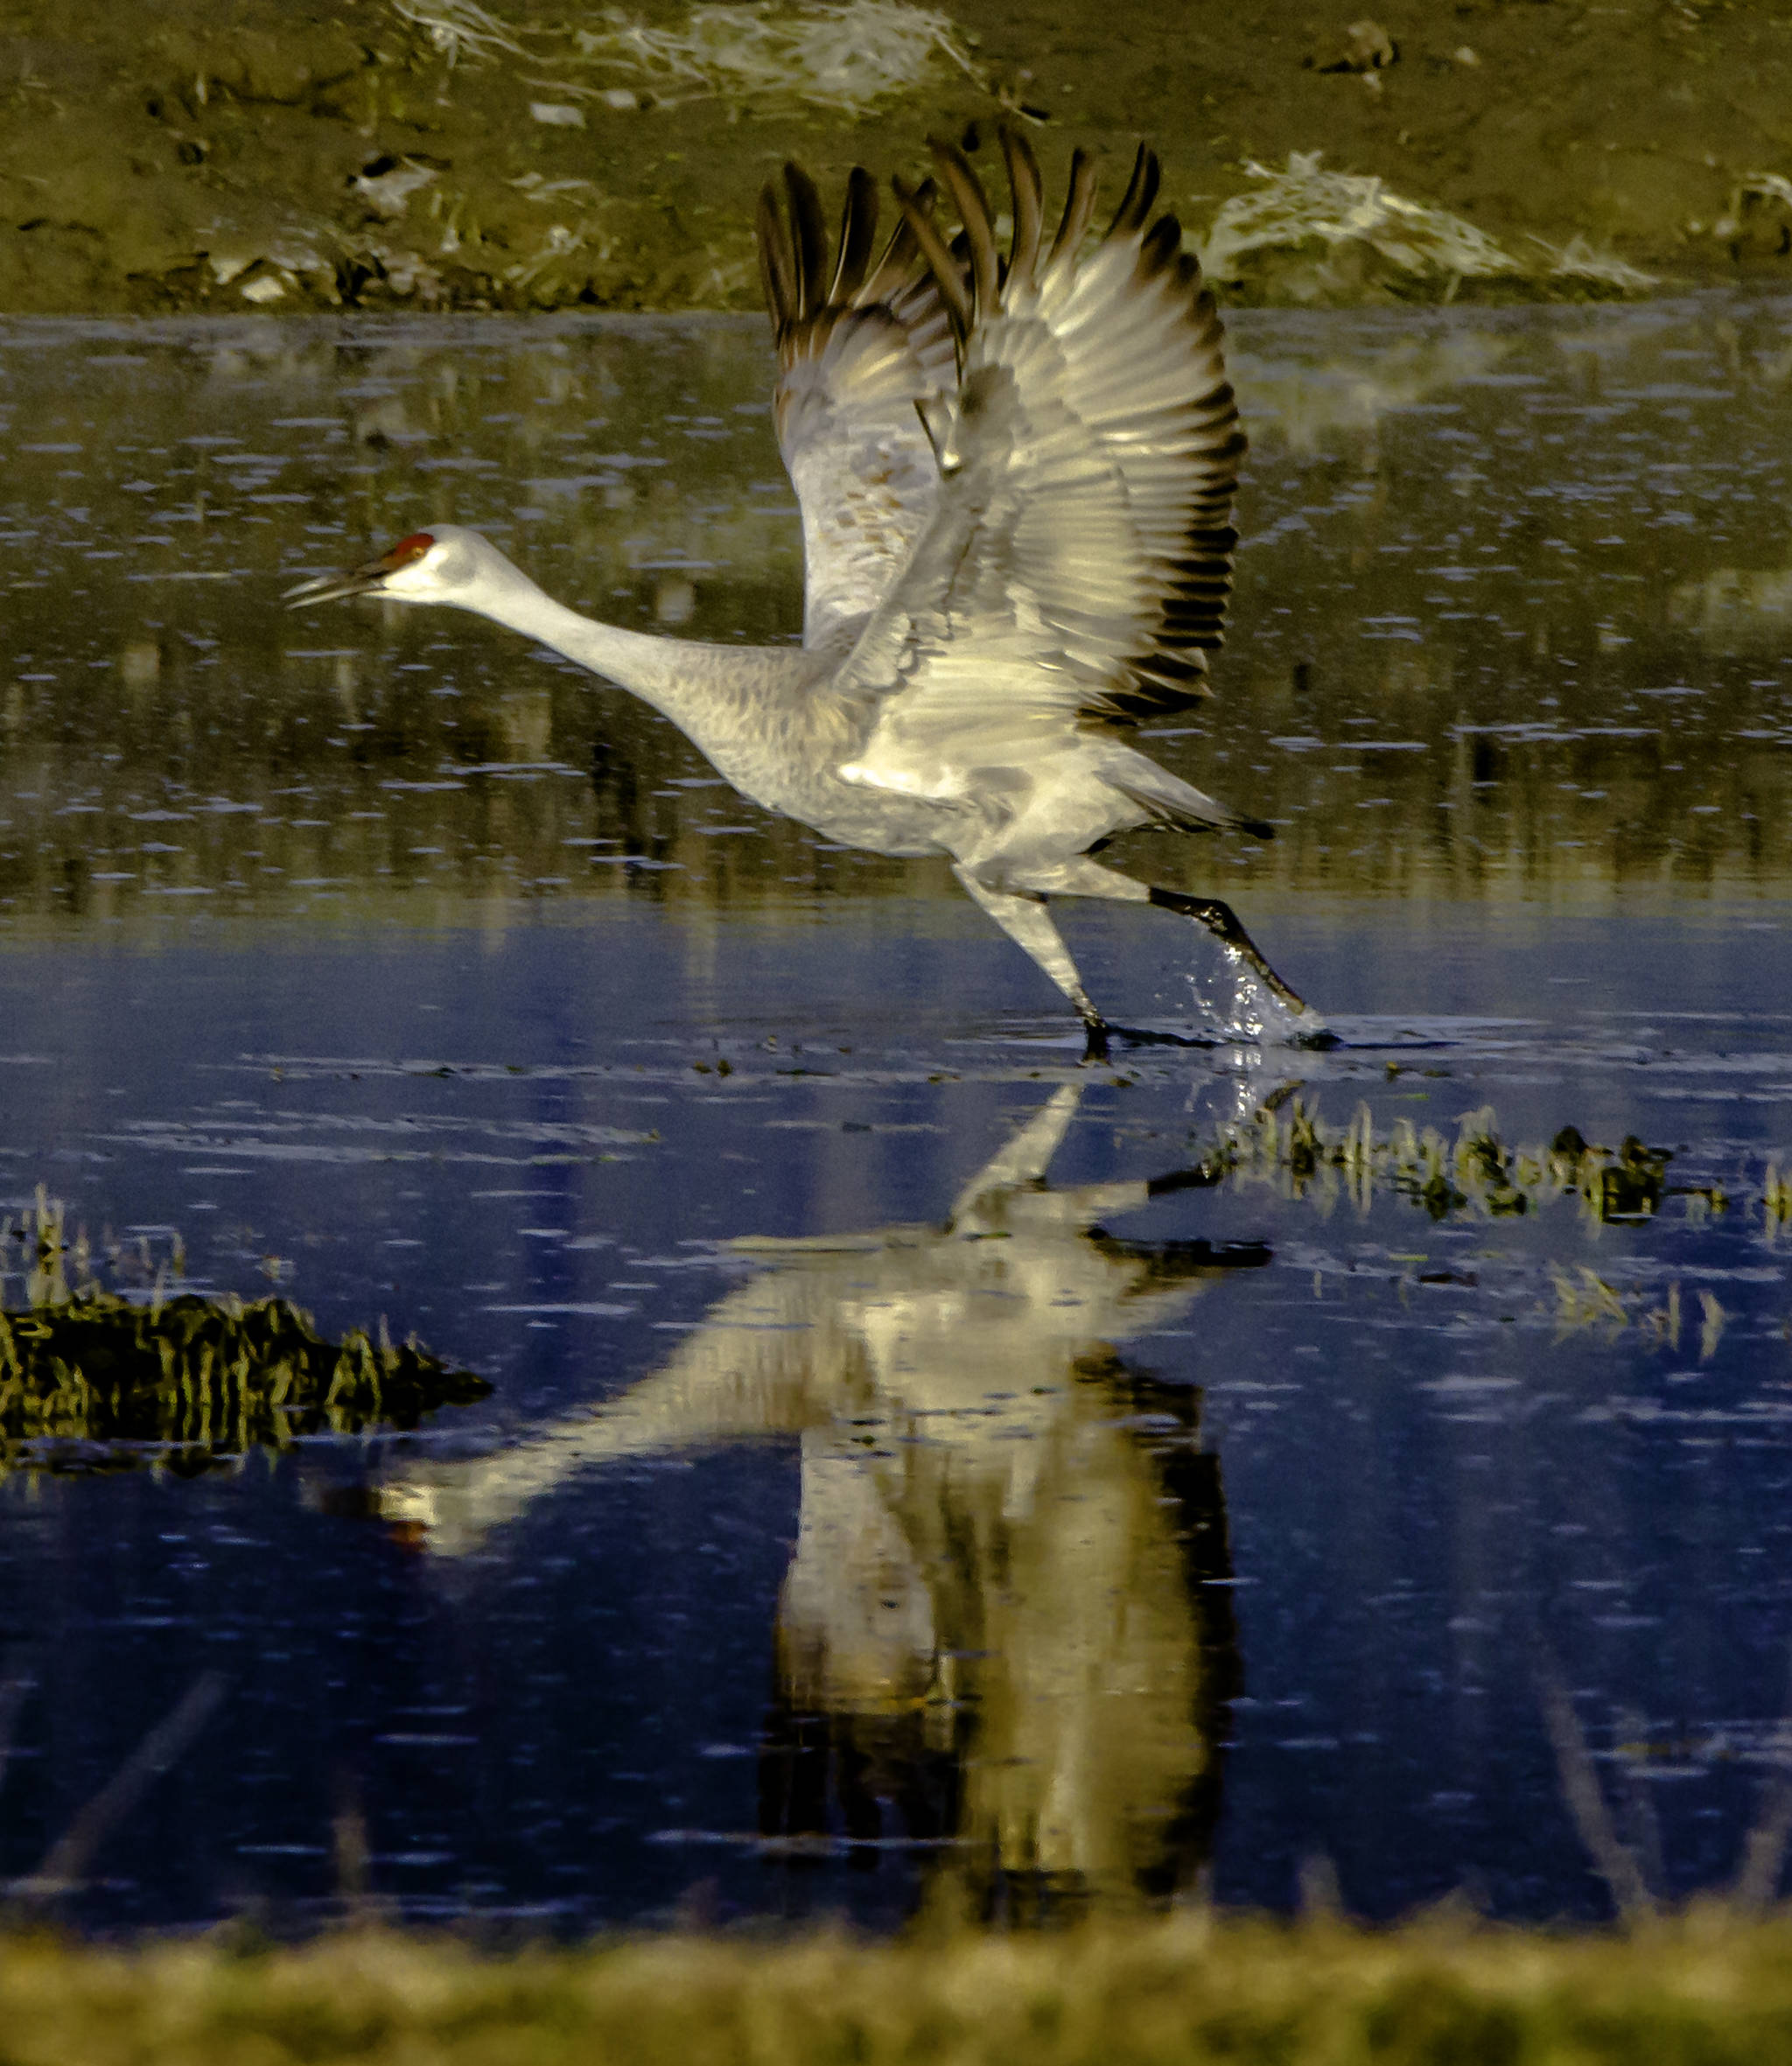 A sandhill crane takes off from the Mendenhall Wetlands on May 10. (Courtesy Photo | Jack Beedle)